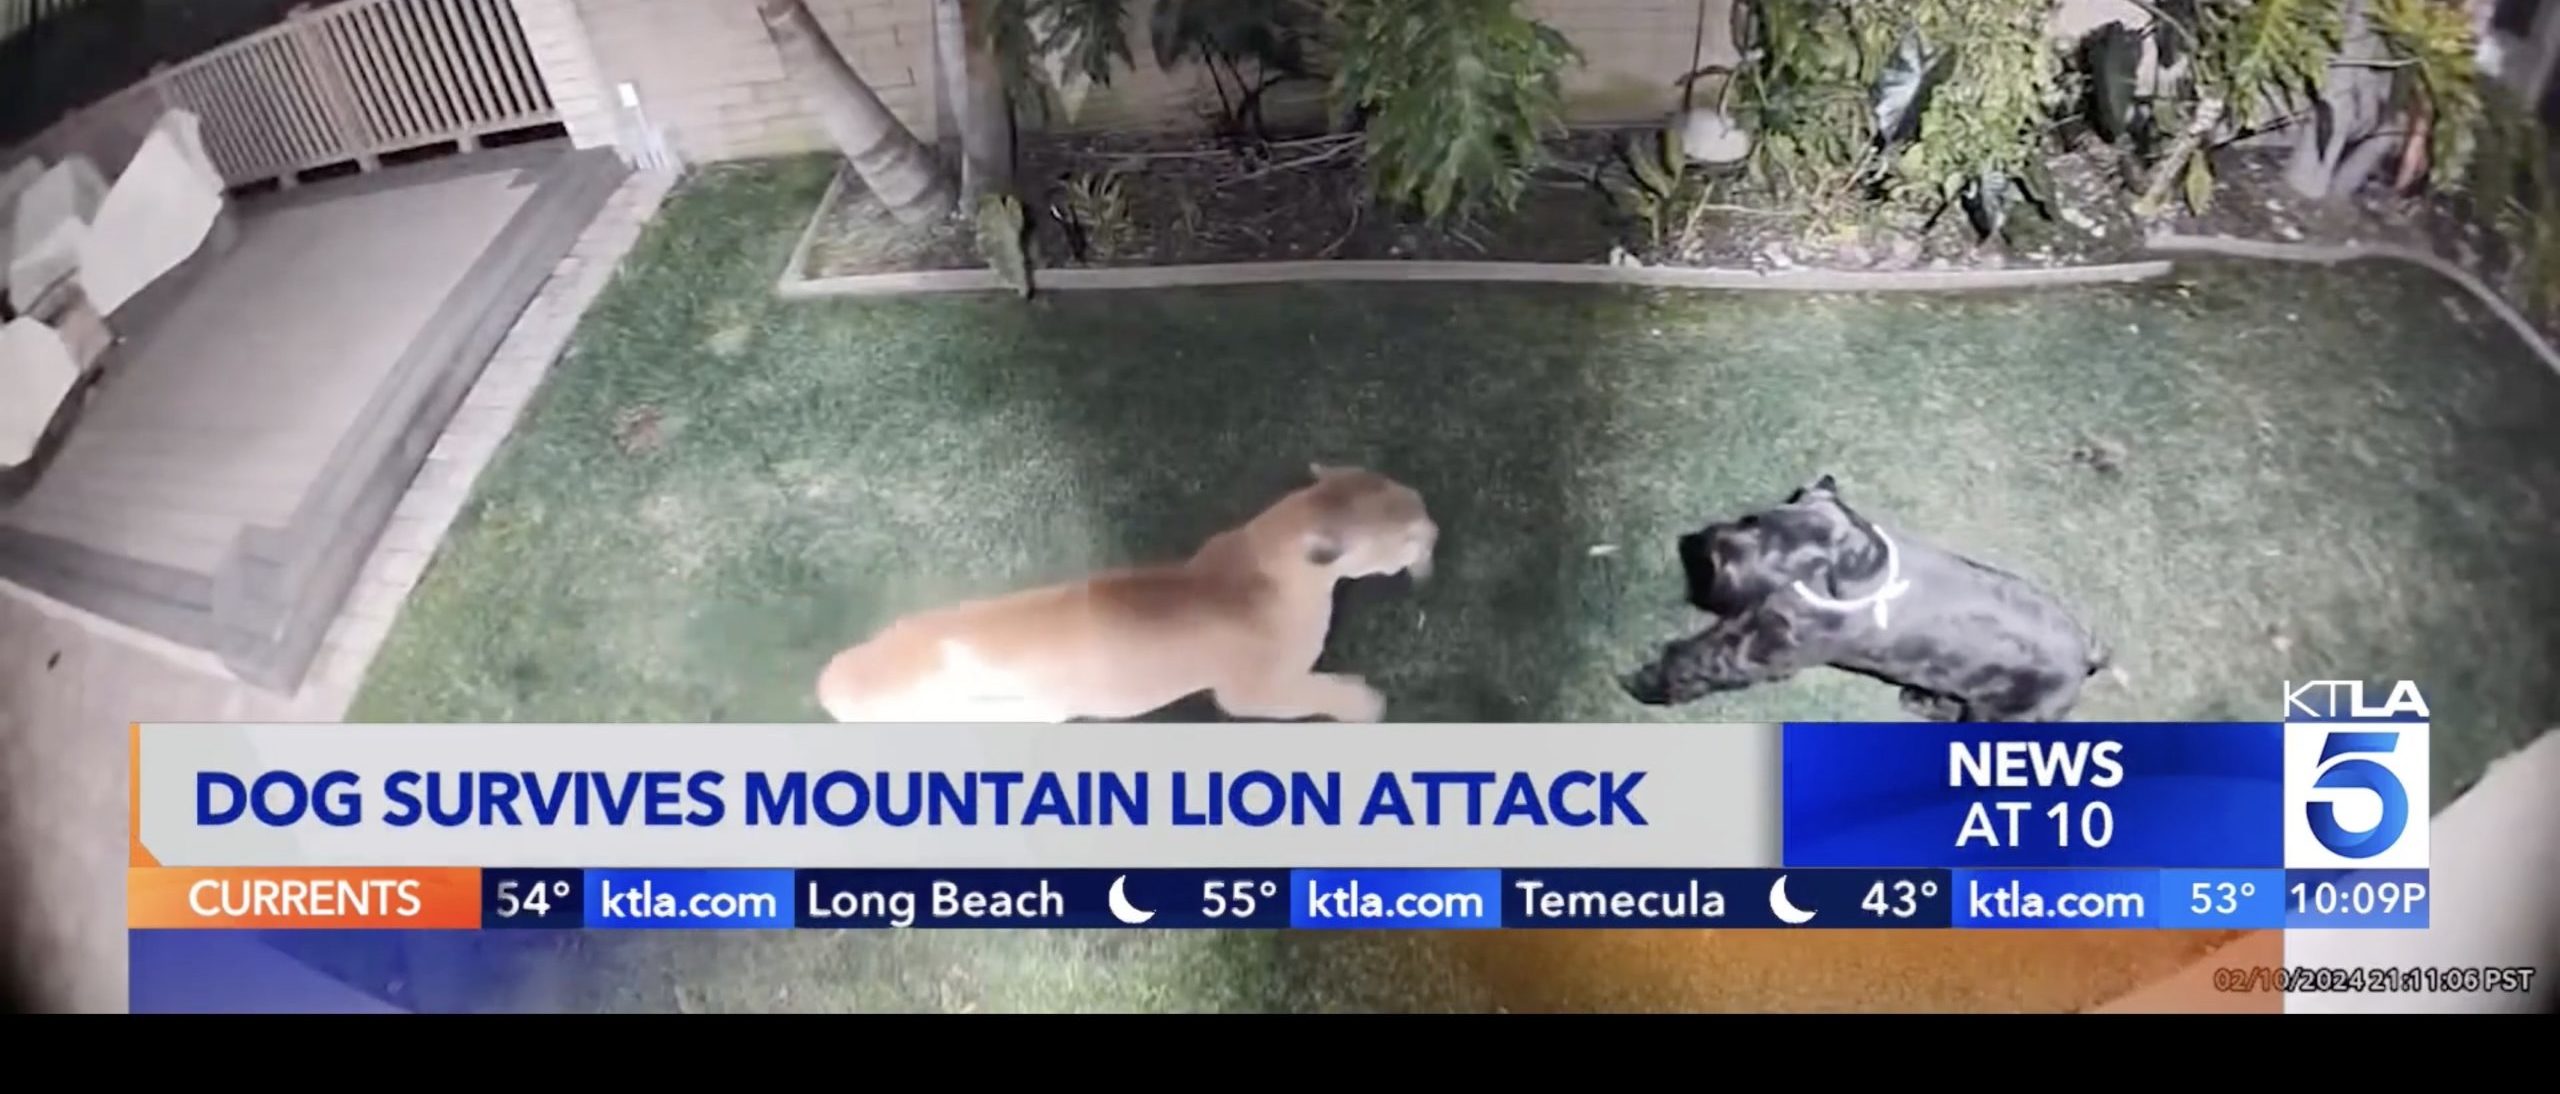 Video Shows Mountain Lion Mangling Giant Schnauzer In Backyard. Dog Somehow Breaks Free And Survives